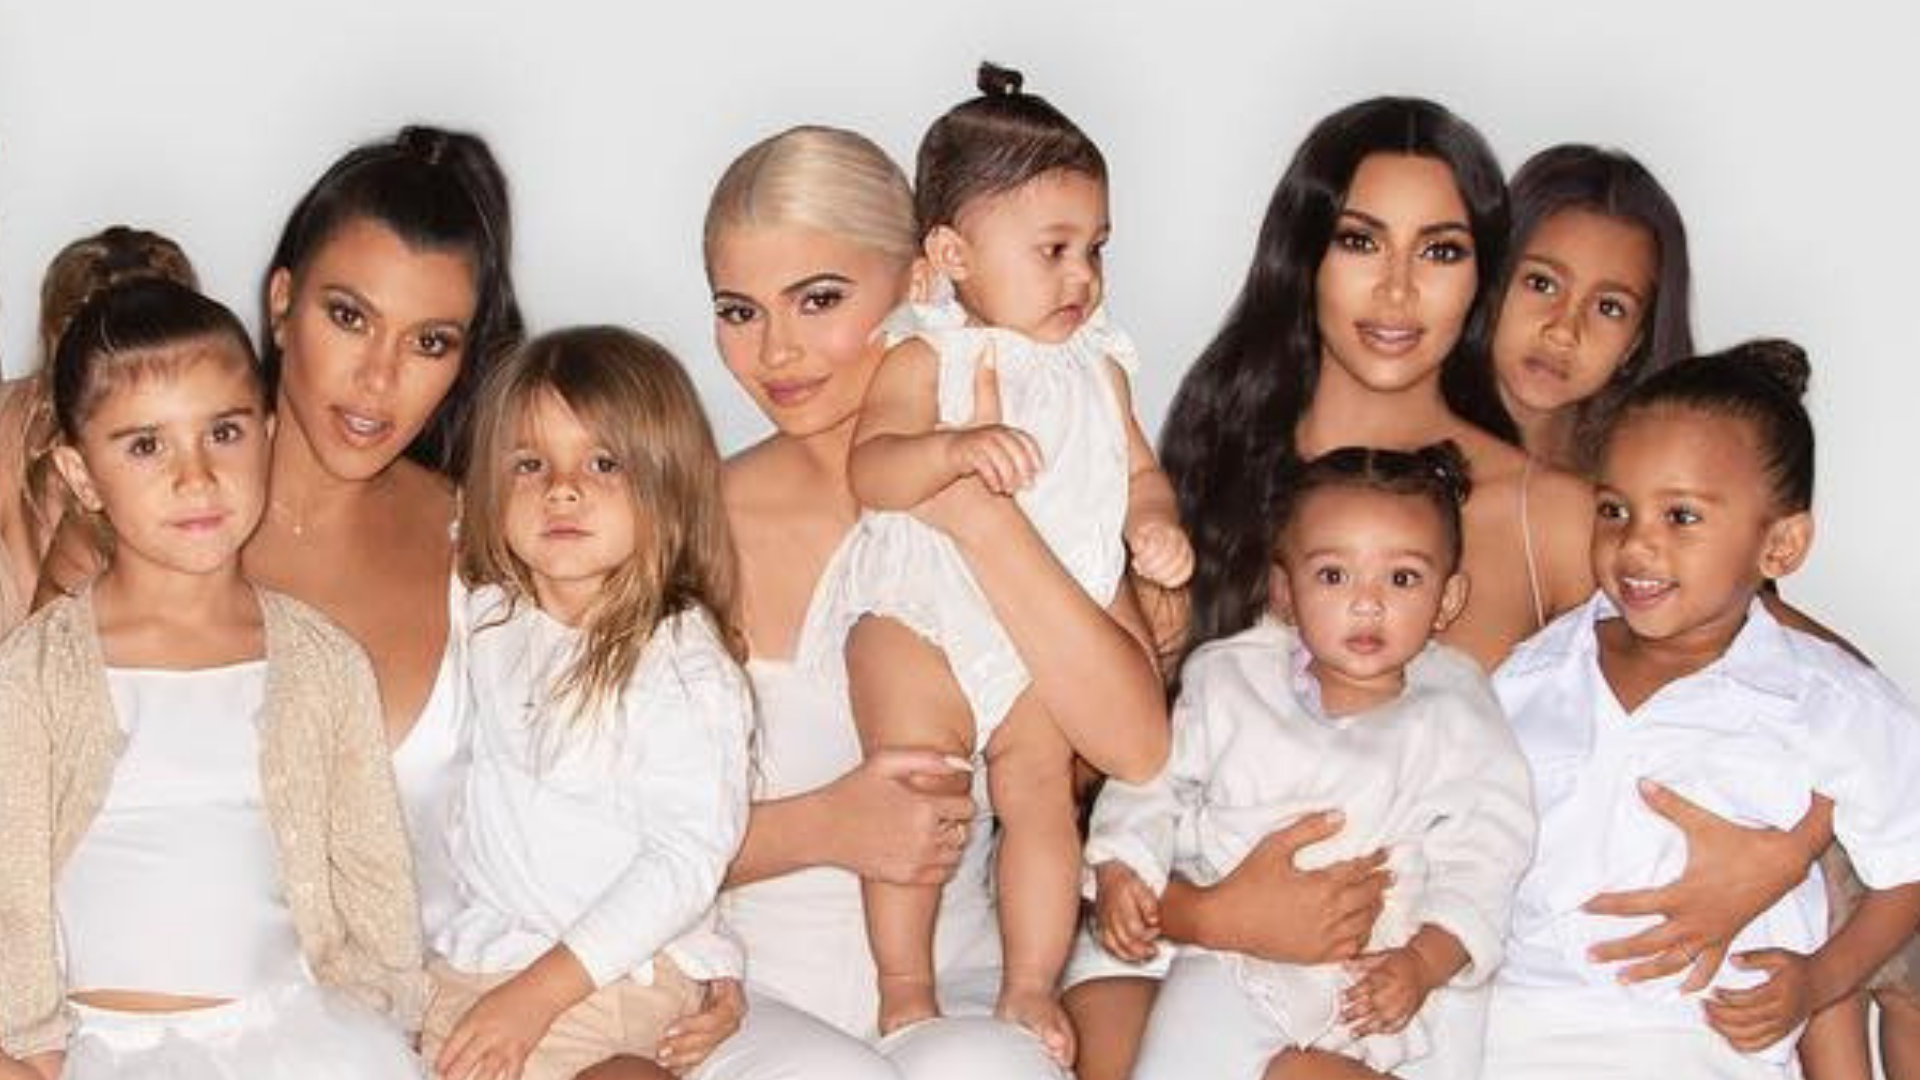 The Kardashian Holiday Card For 2018 Is Here, But Some Key Family